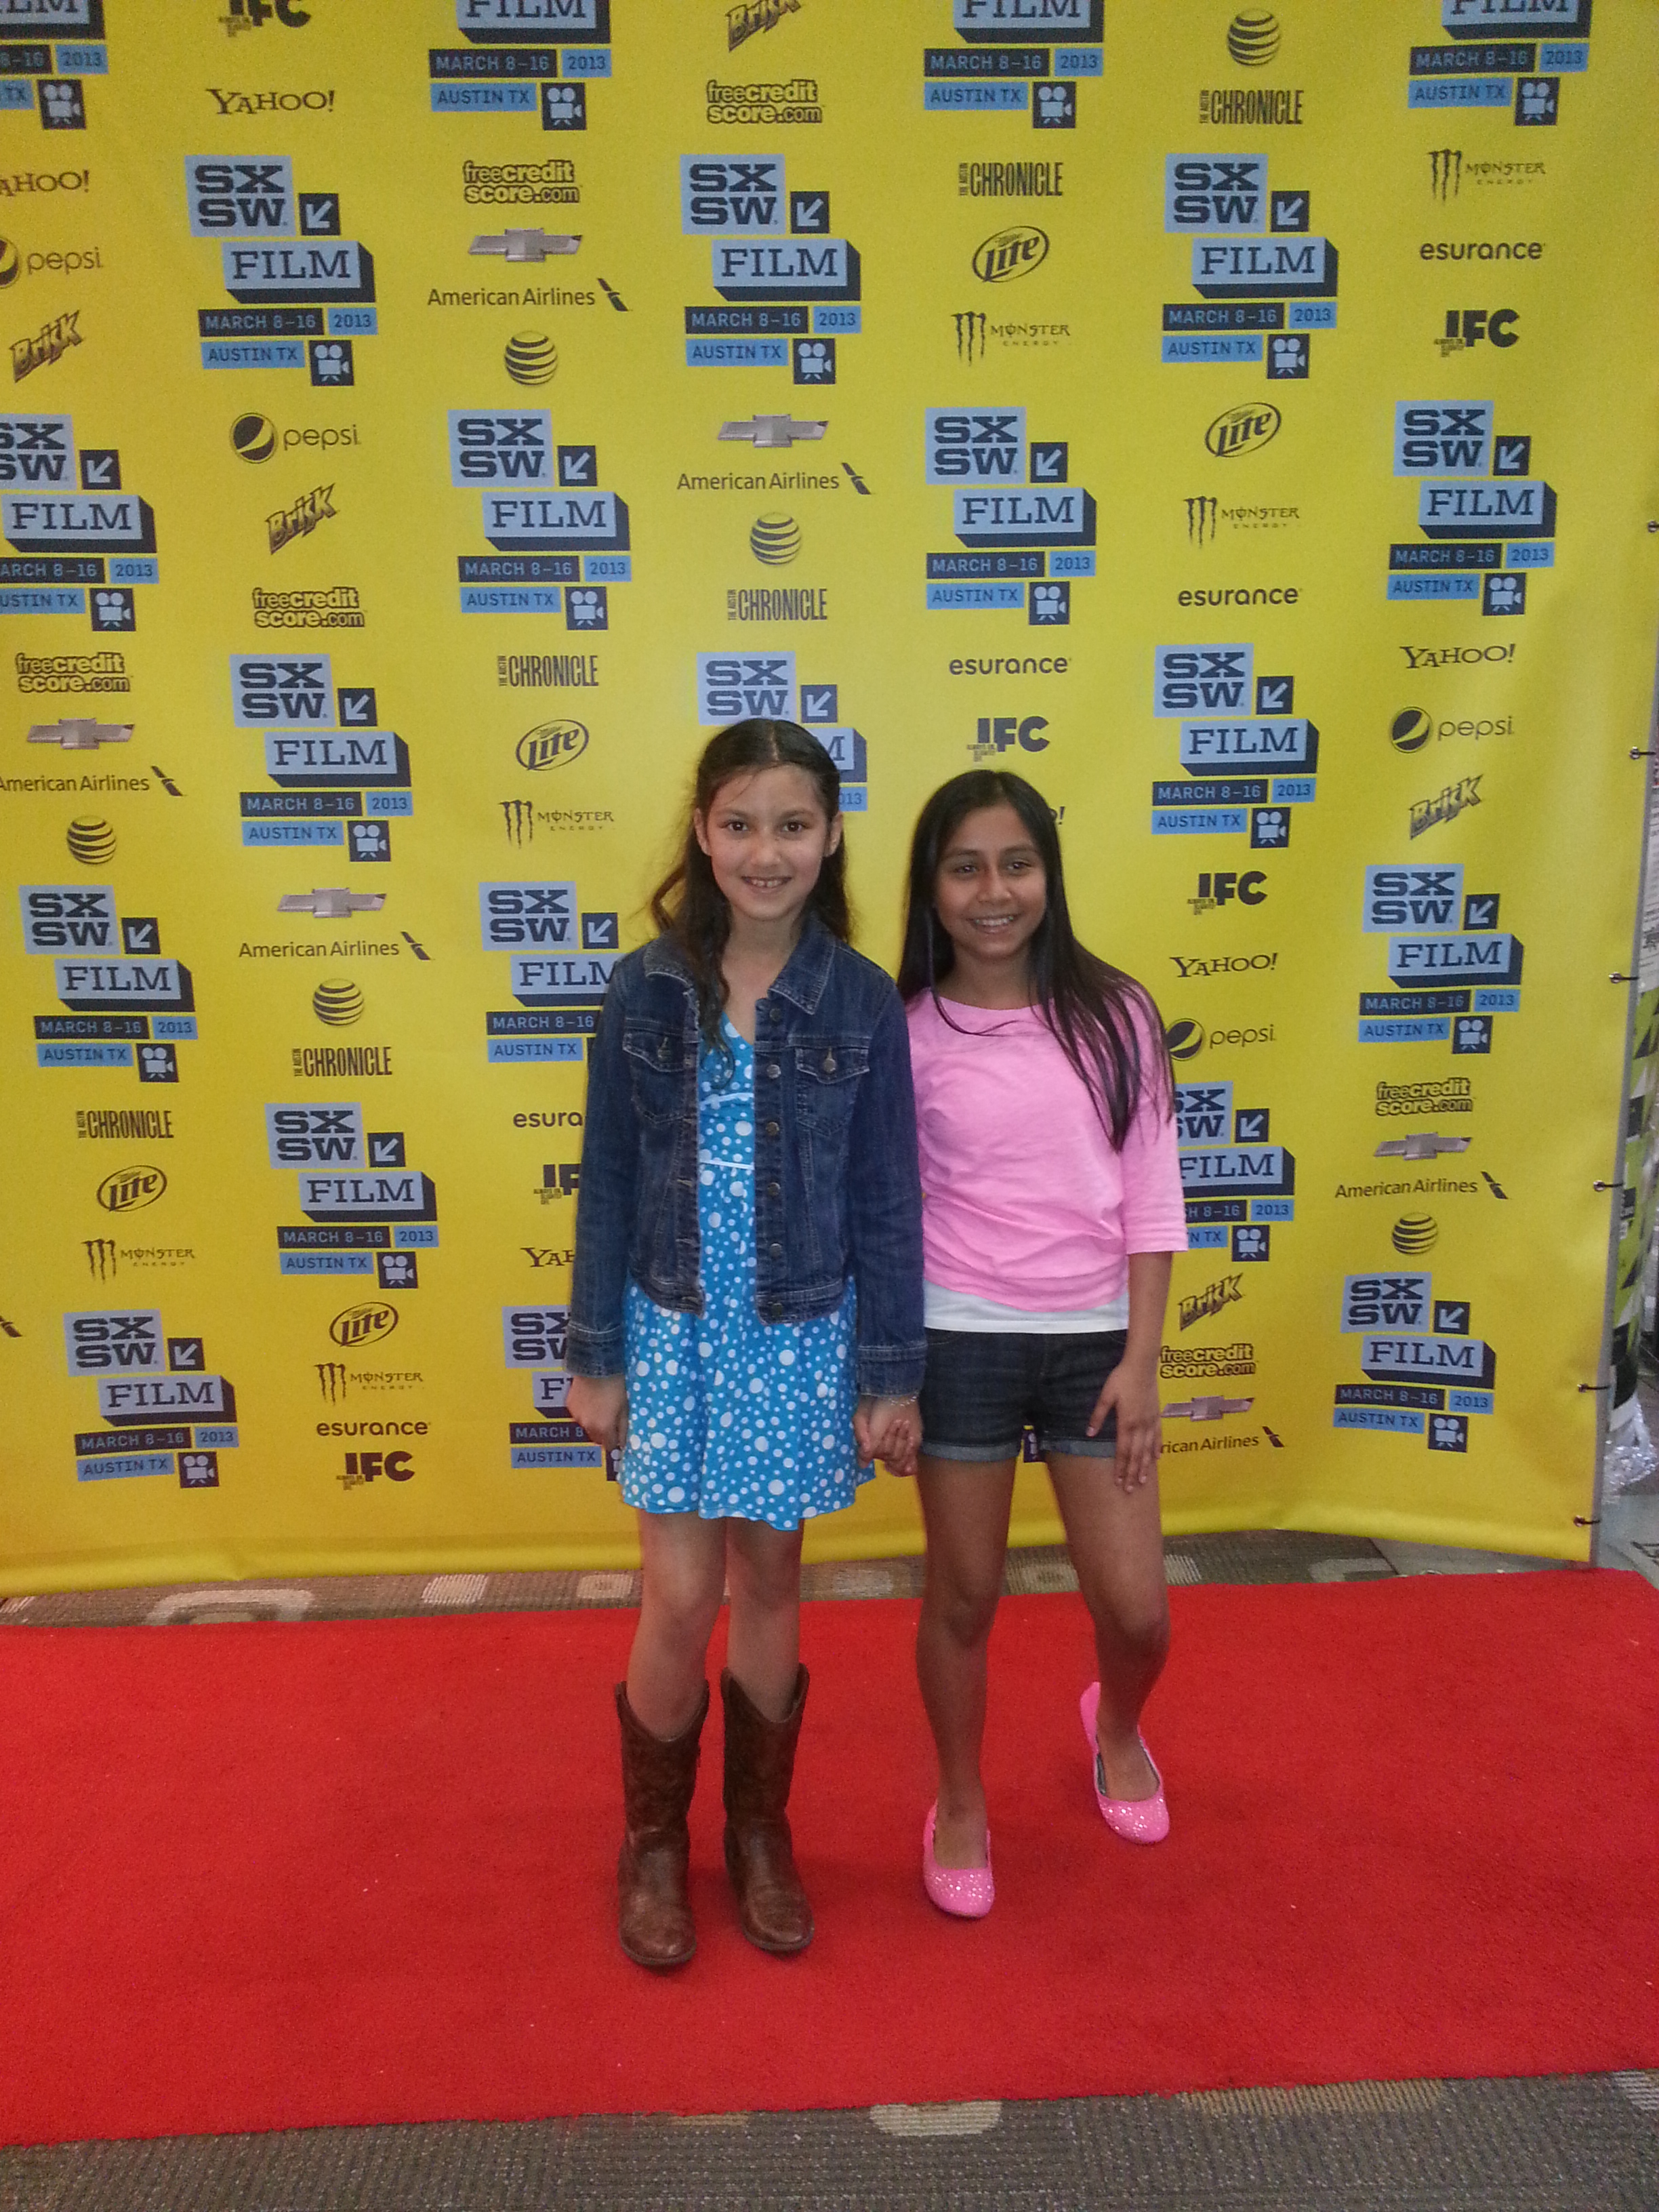 Savanah Montalvo and Nadia Islam hanging out at the SXSW Primier of Grow Up Tony Phillips 2013 Austin TX